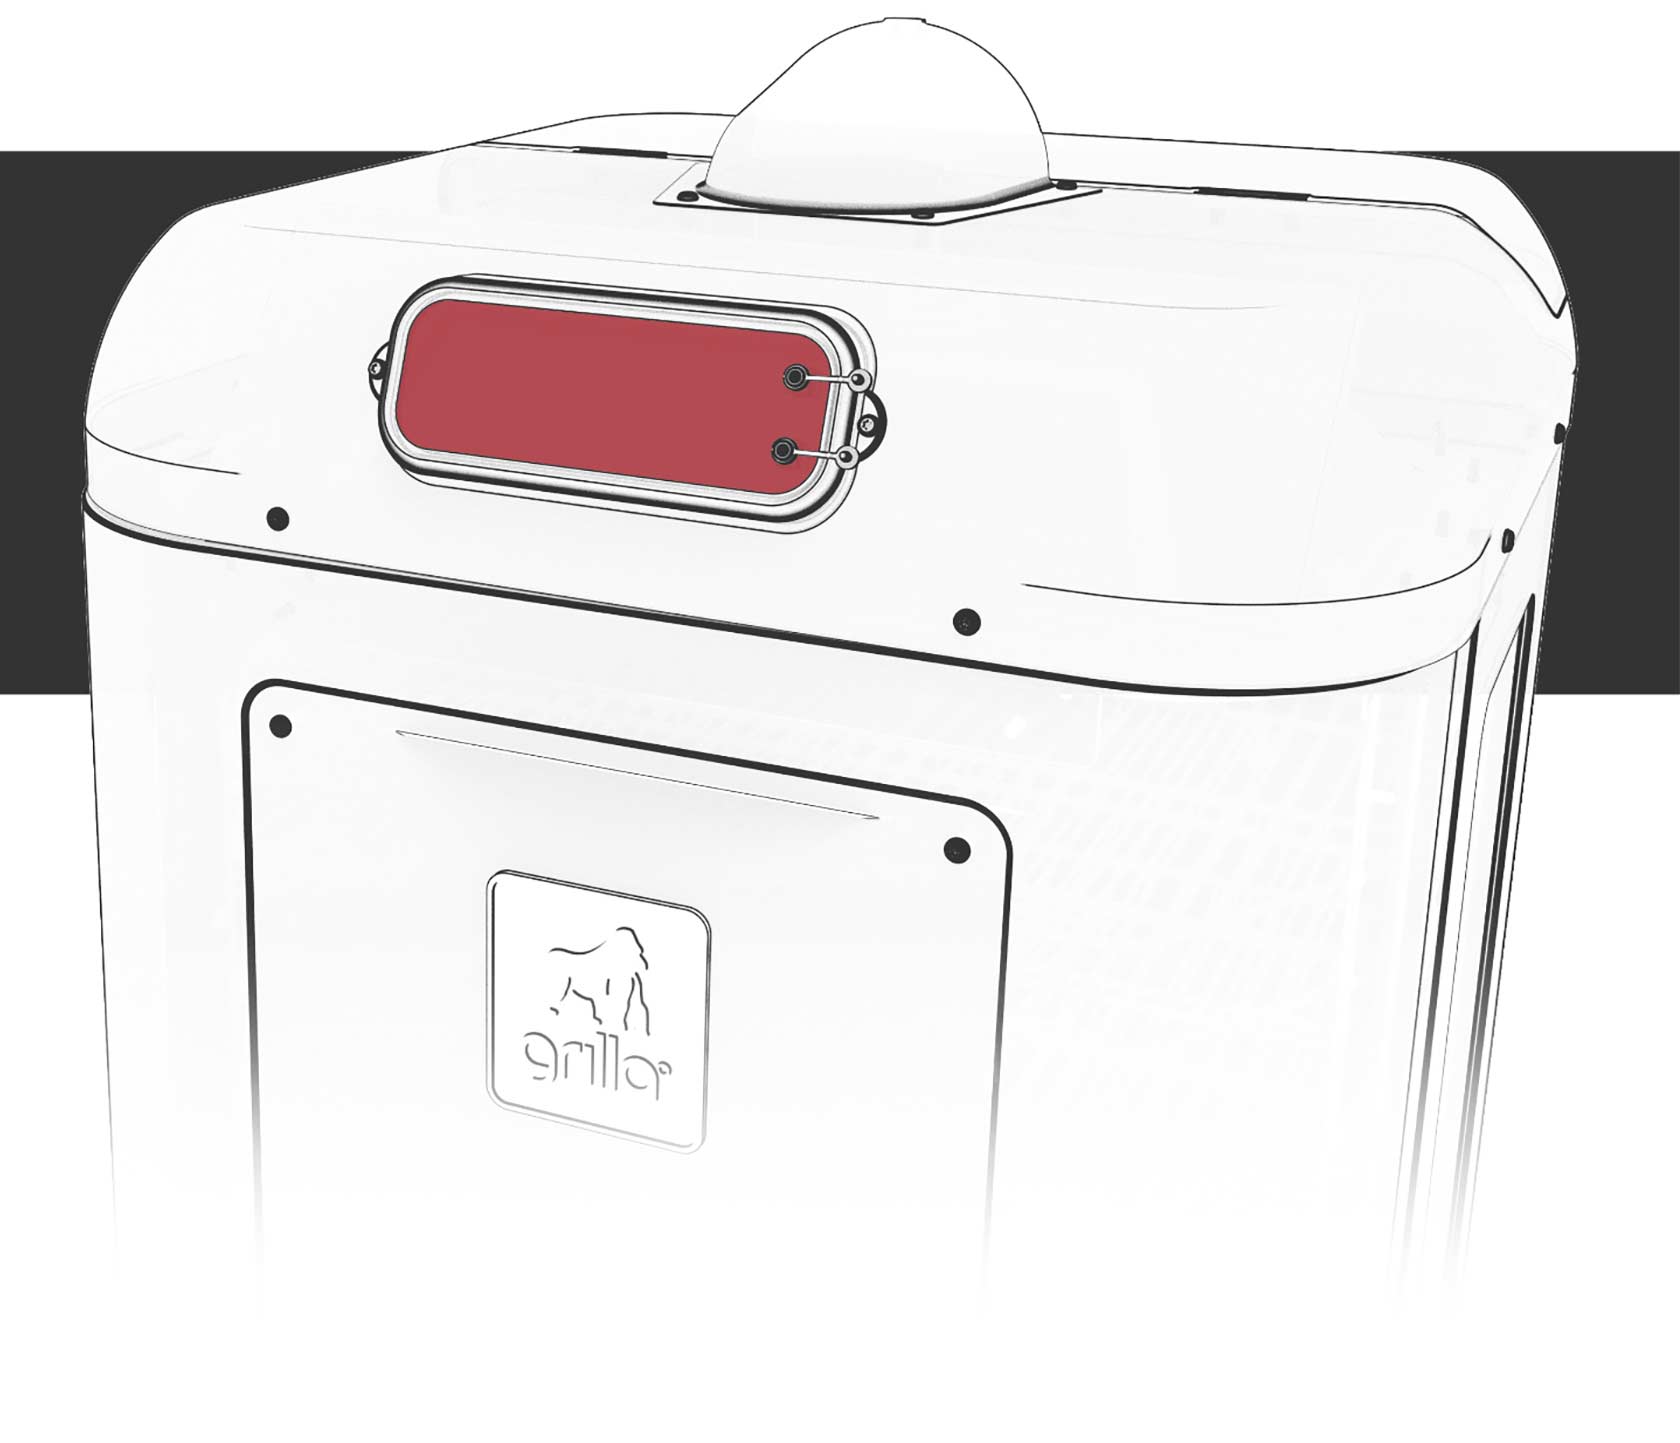 grilla mammoth pid controller highlighted on the new grilla mammoth vertical pellet smoker